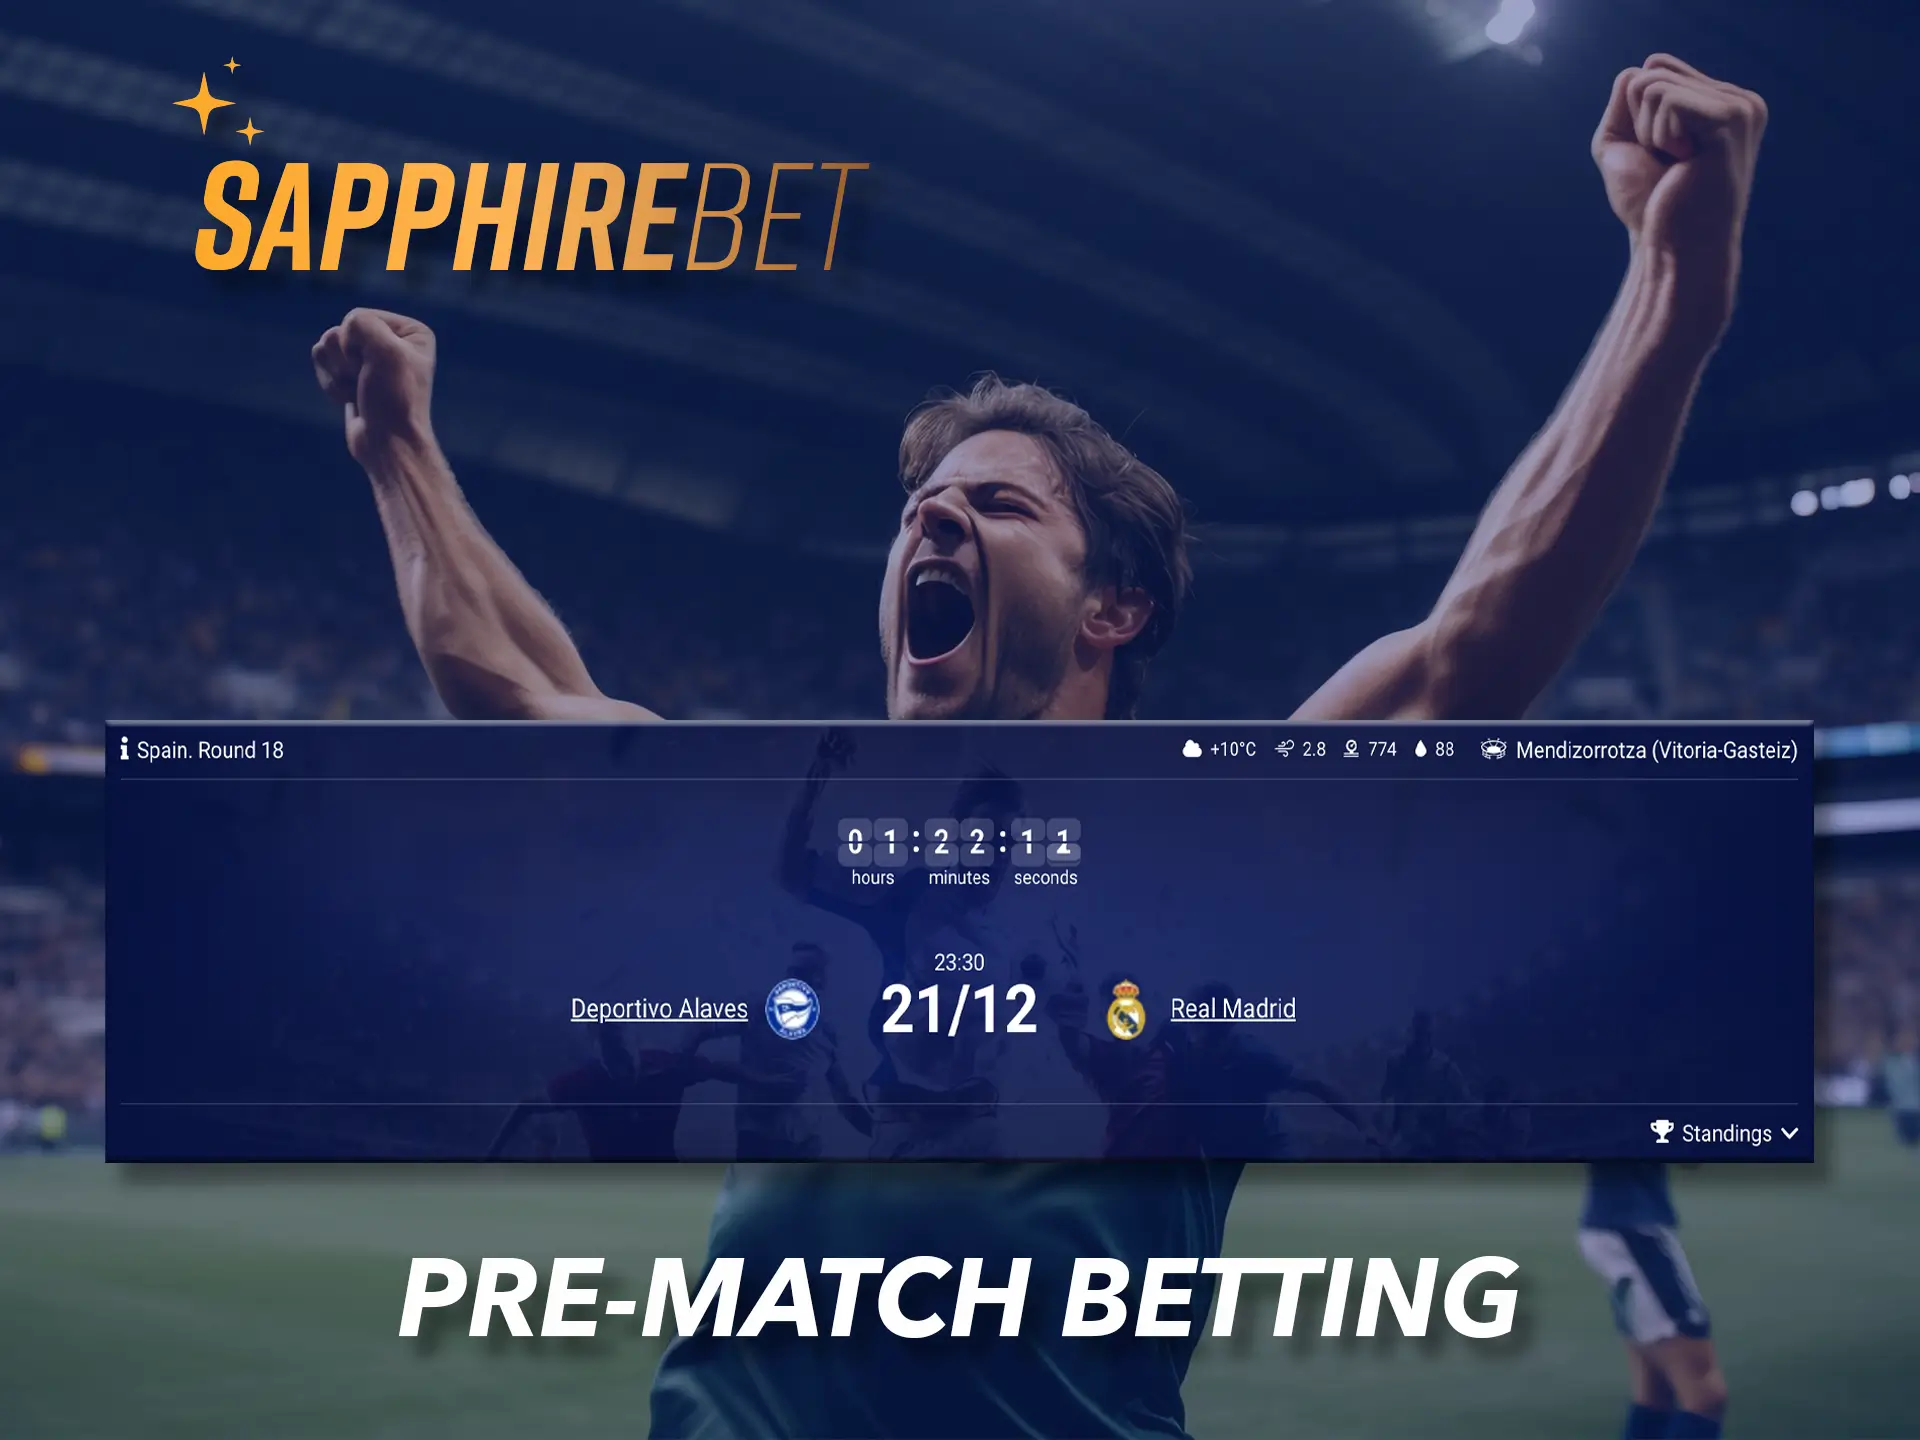 You will find the most favourable terms at Sapphirebet in pre-match betting.